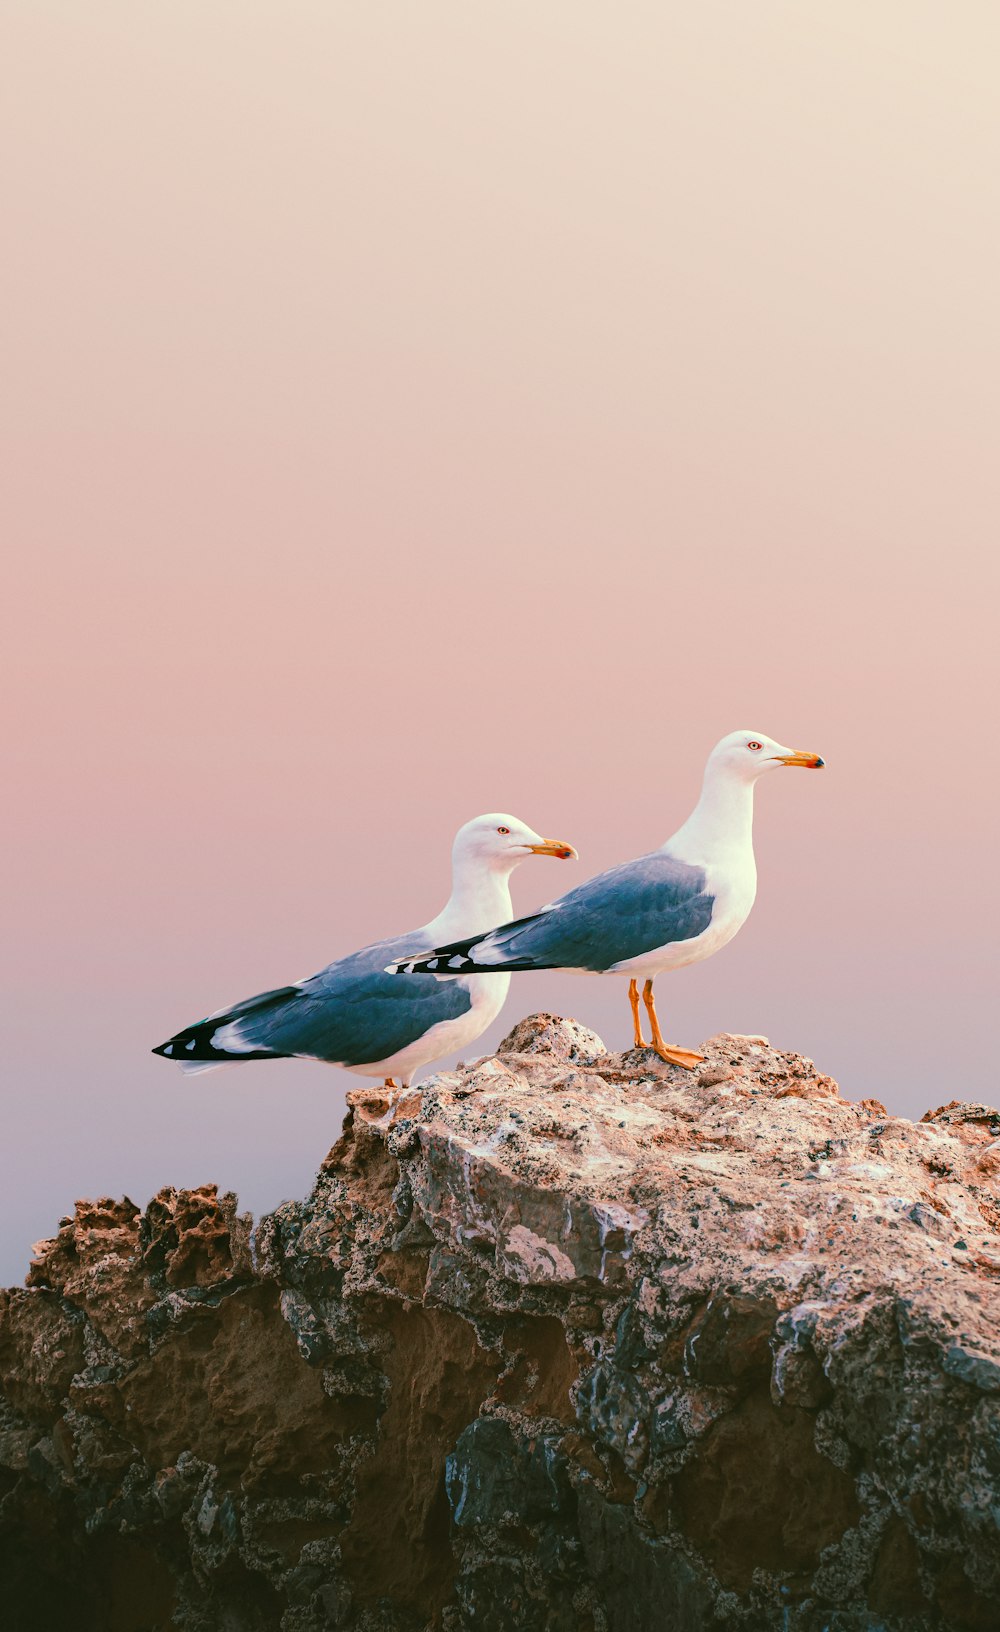 two seagulls sitting on a rock in front of a pink sky